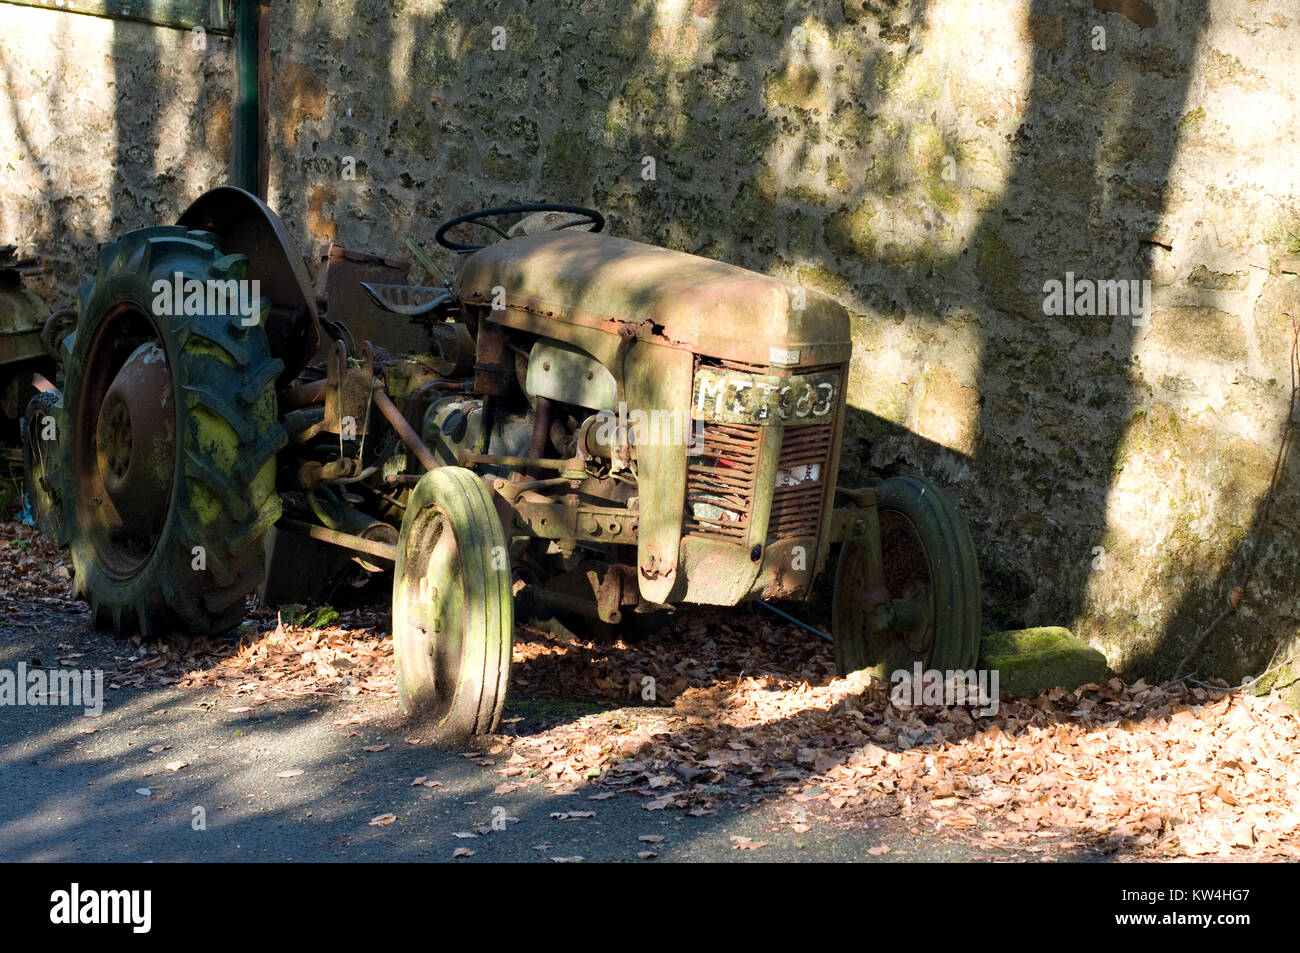 Antiquated tractor in disrepair Stock Photo